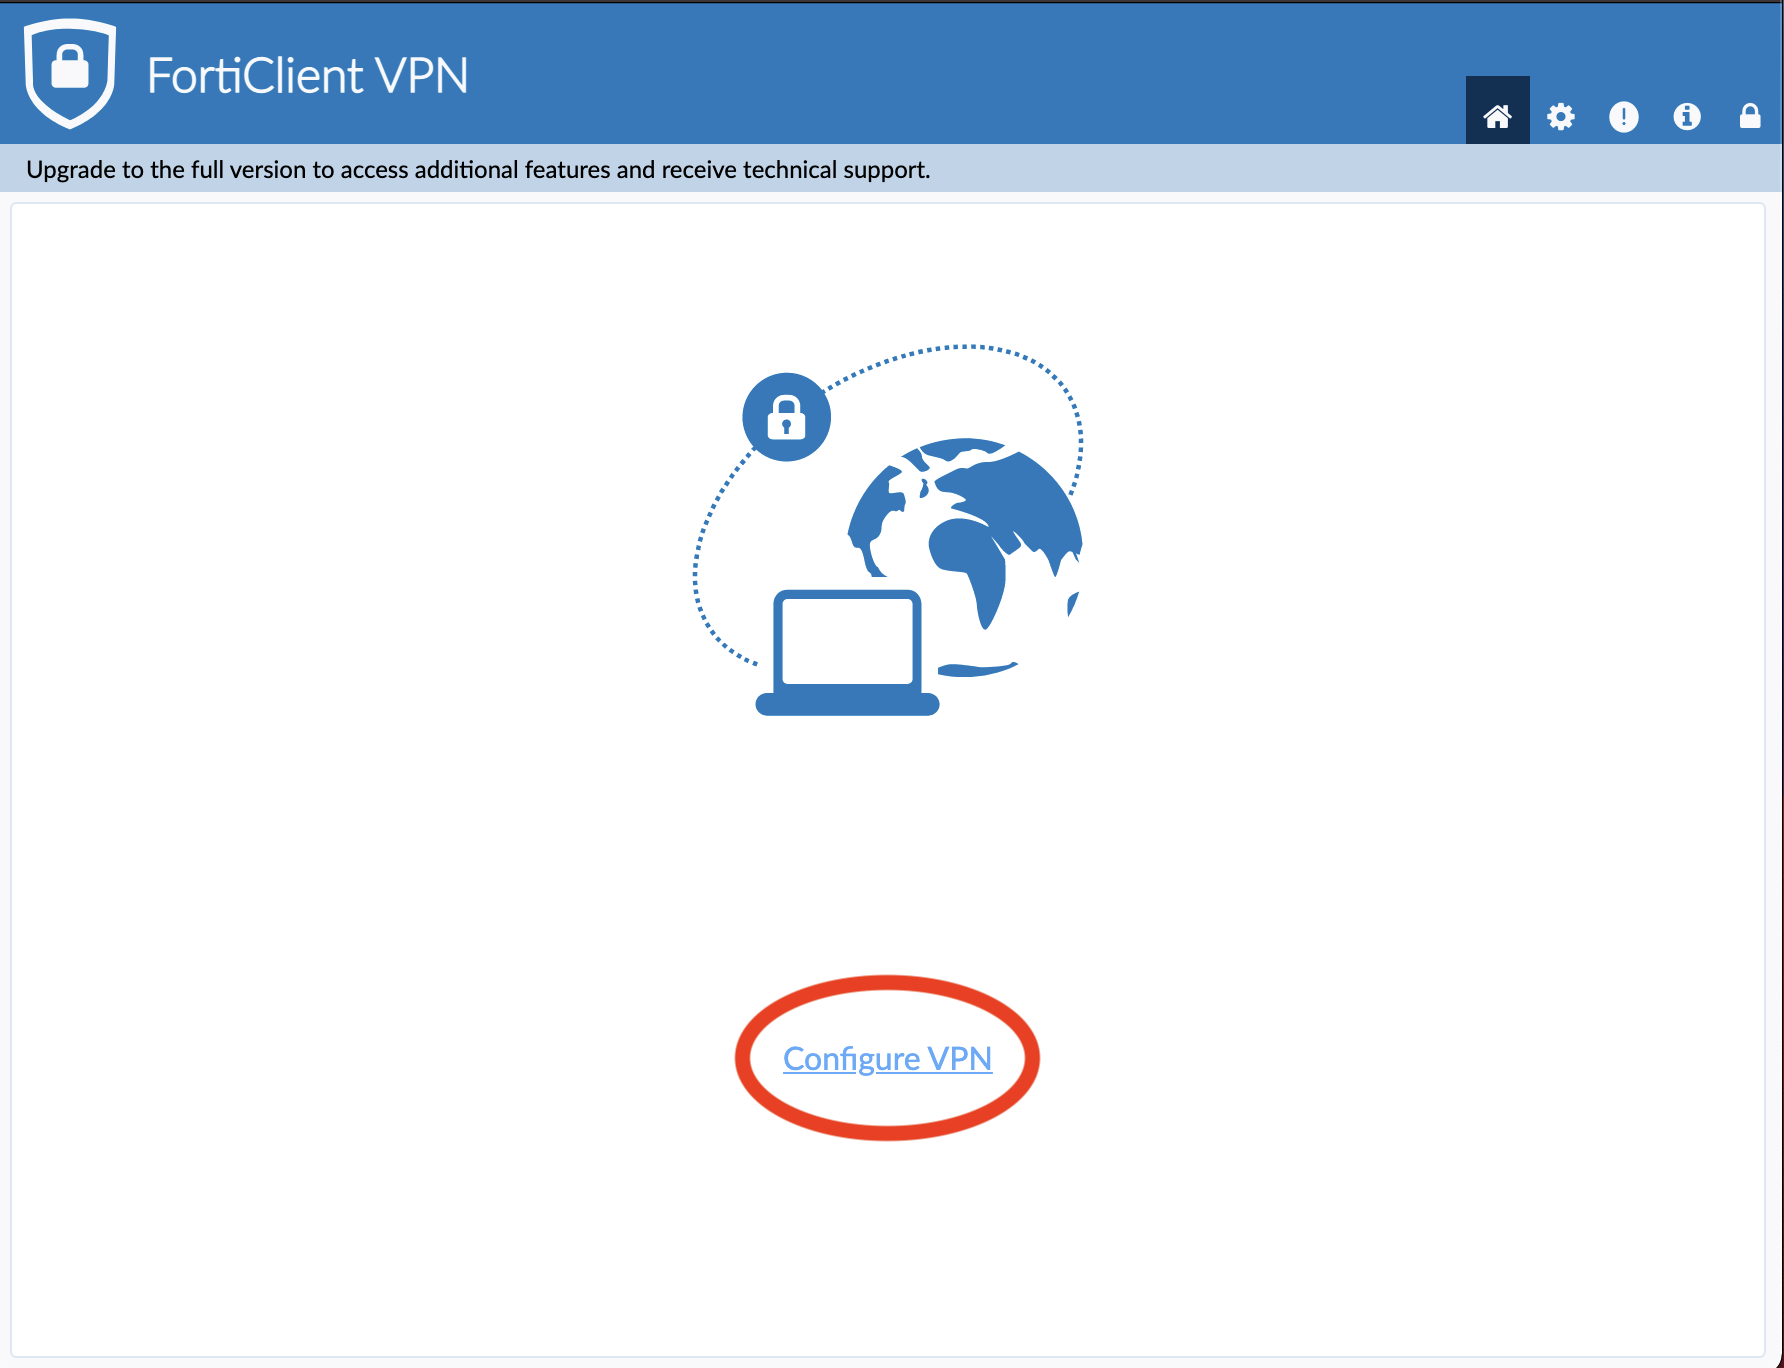 View of the fortiClient window, with the "Configure VPN" link circled.